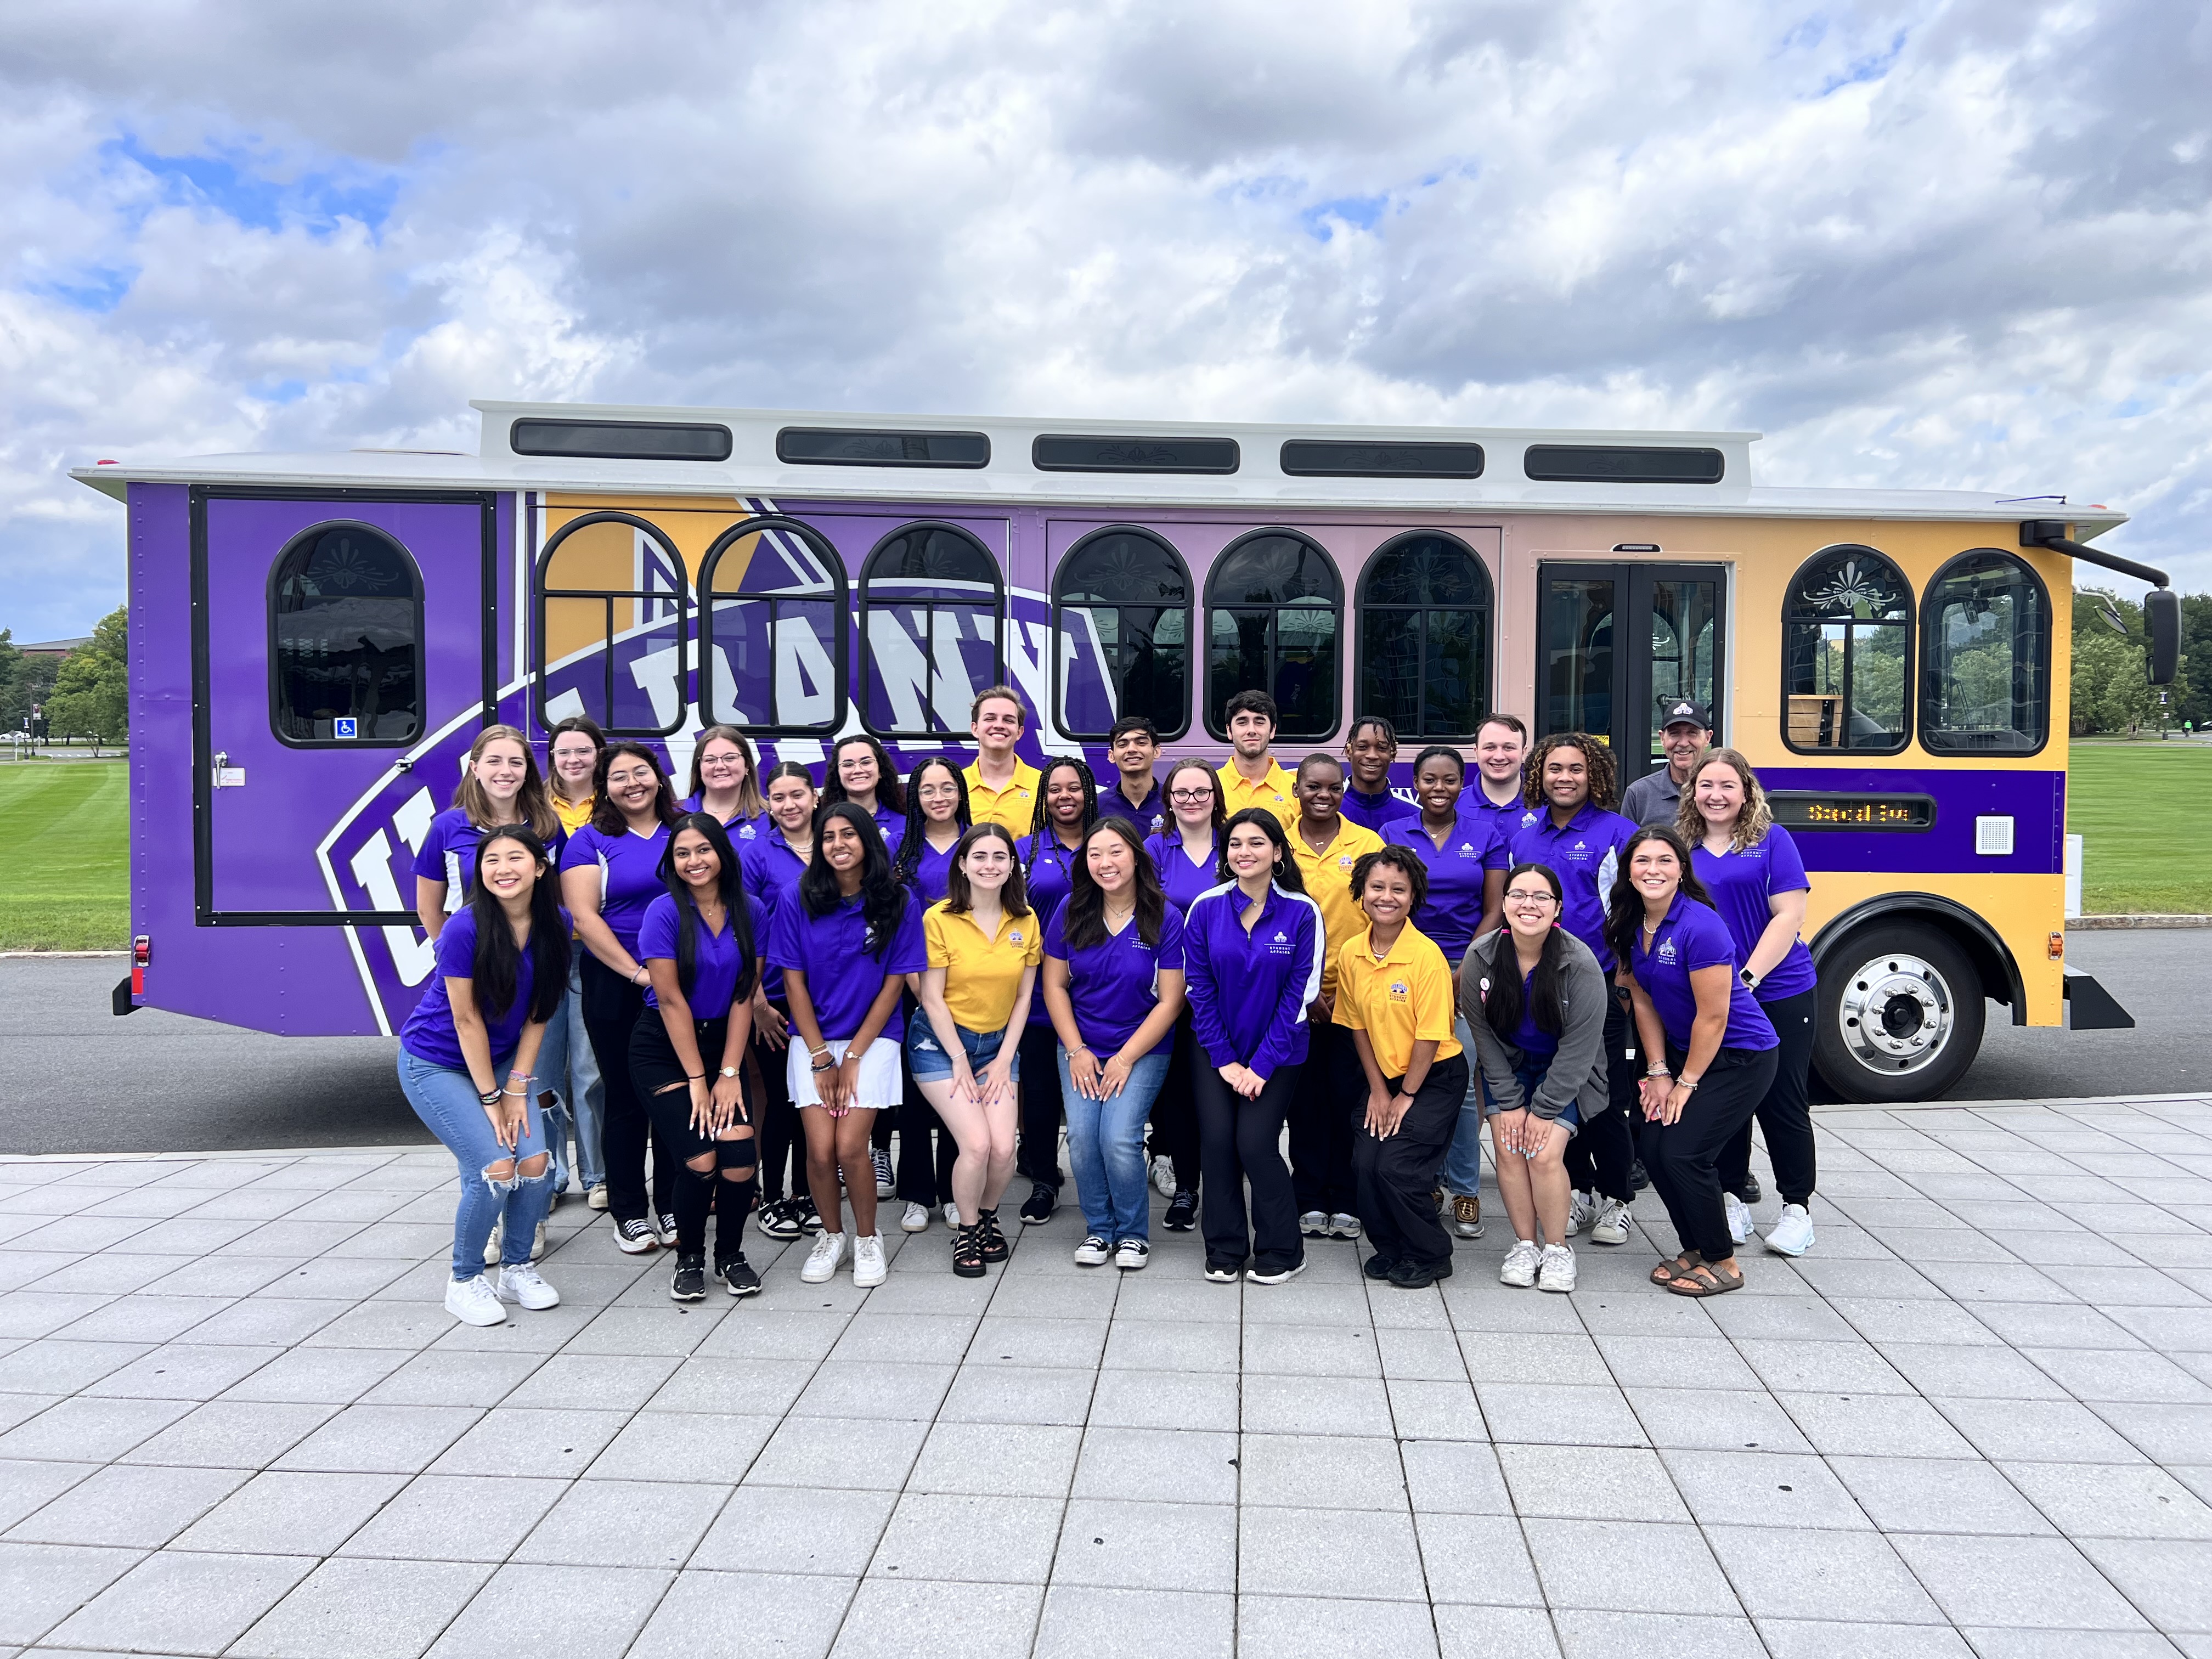 A group of students and staff members posed in front of the UAlbany trolley.